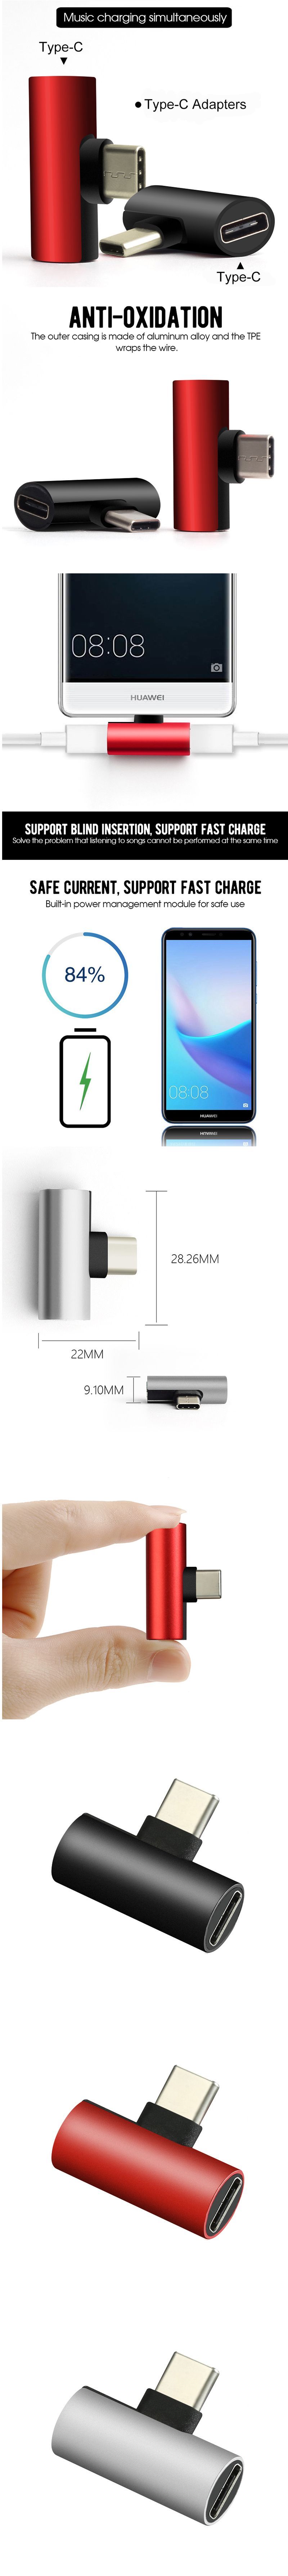 2-In-1-Type-C-Dual-Headphone-Jack-Adapter-Audio-Charger-for-Samsung-Huawei-Splitter-Converter-Xiaomi-1477583